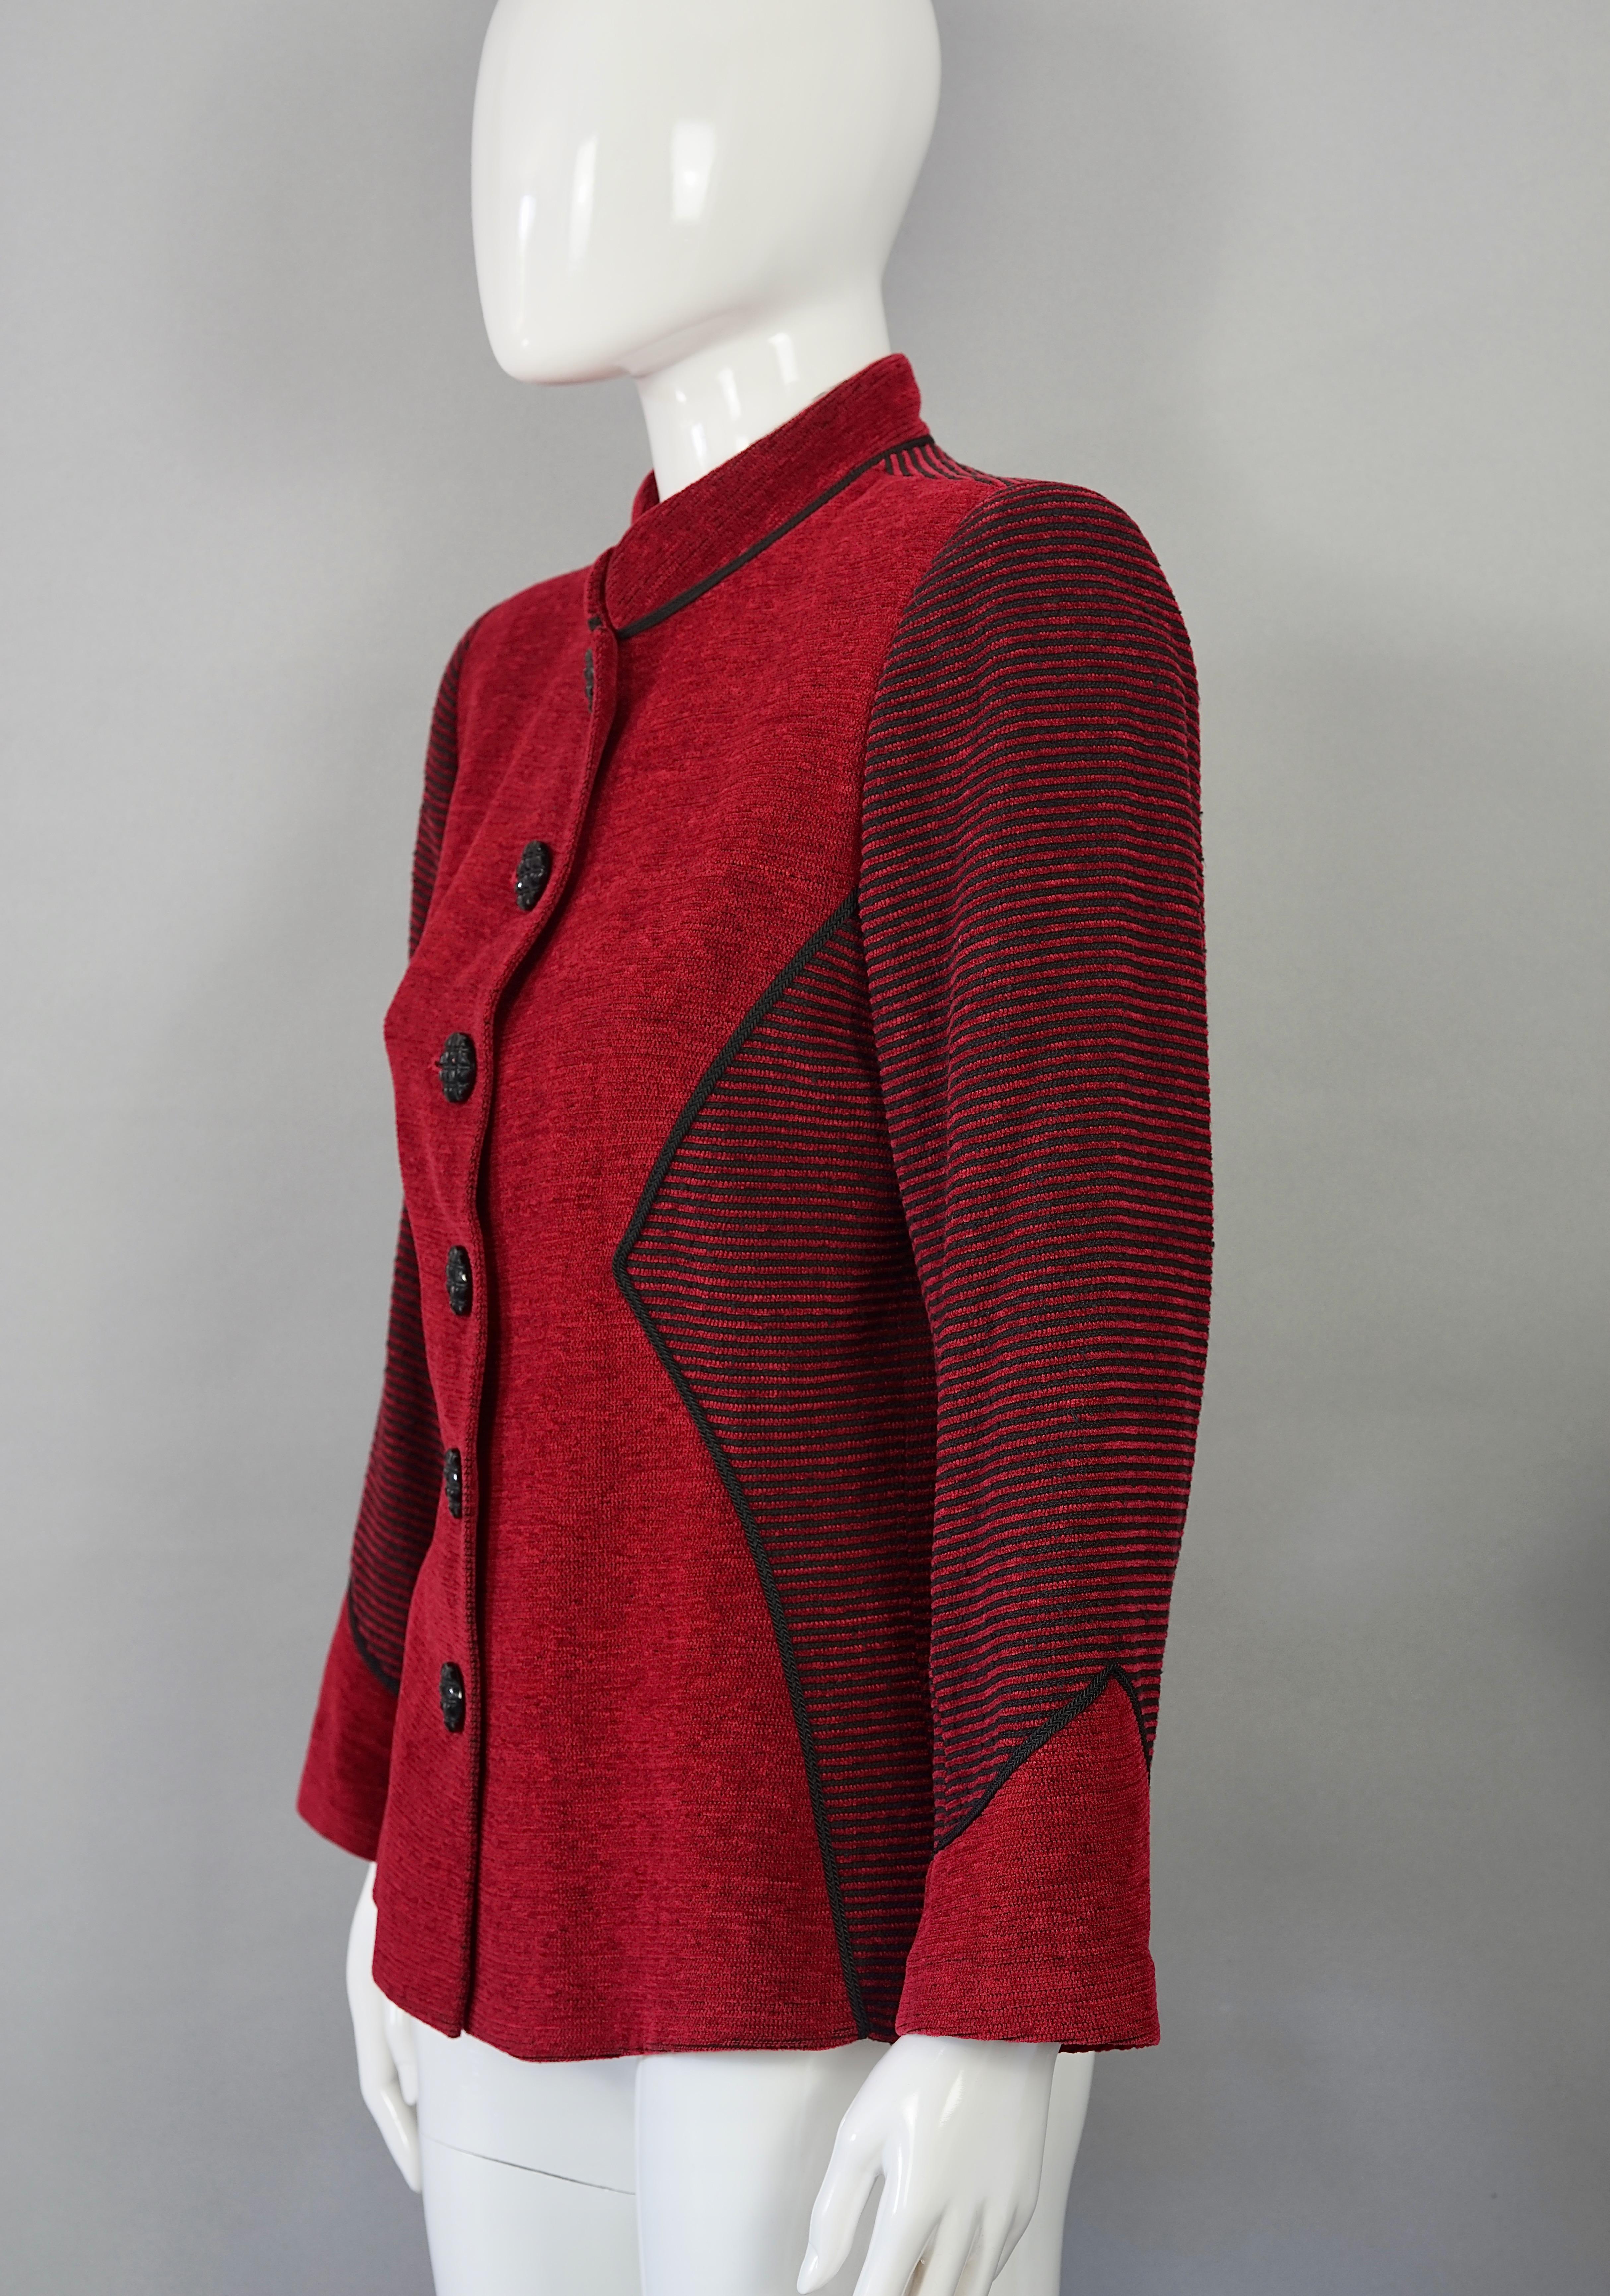 Vintage YVES SAINT LAURENT Ysl Red Mandarin Collar Jacket

Measurements taken laid flat:
Shoulder: 16.14 inches (41 cm)
Sleeves: 22.44 inches (57 cm)
Bust: 20.47 inches (52 cm)
Waist: 17.32 inches (44 cm)
Length: 27.55 inches  (70 cm)

Features:
-